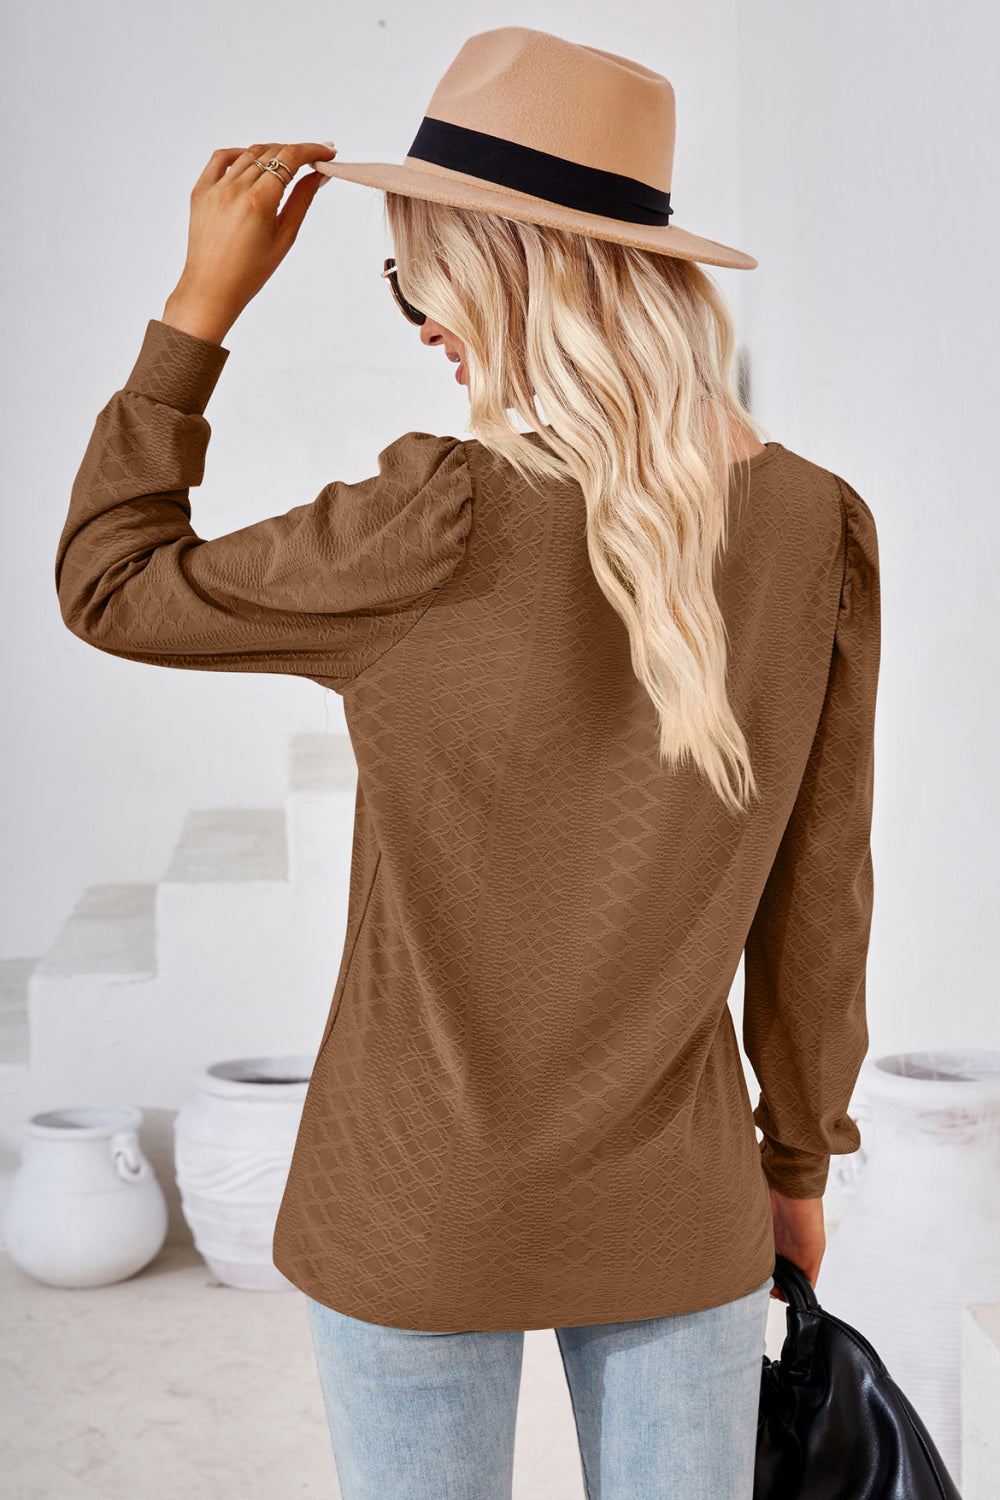 Square Neck Puff Sleeve Blouse - Women’s Clothing & Accessories - Shirts & Tops - 20 - 2024